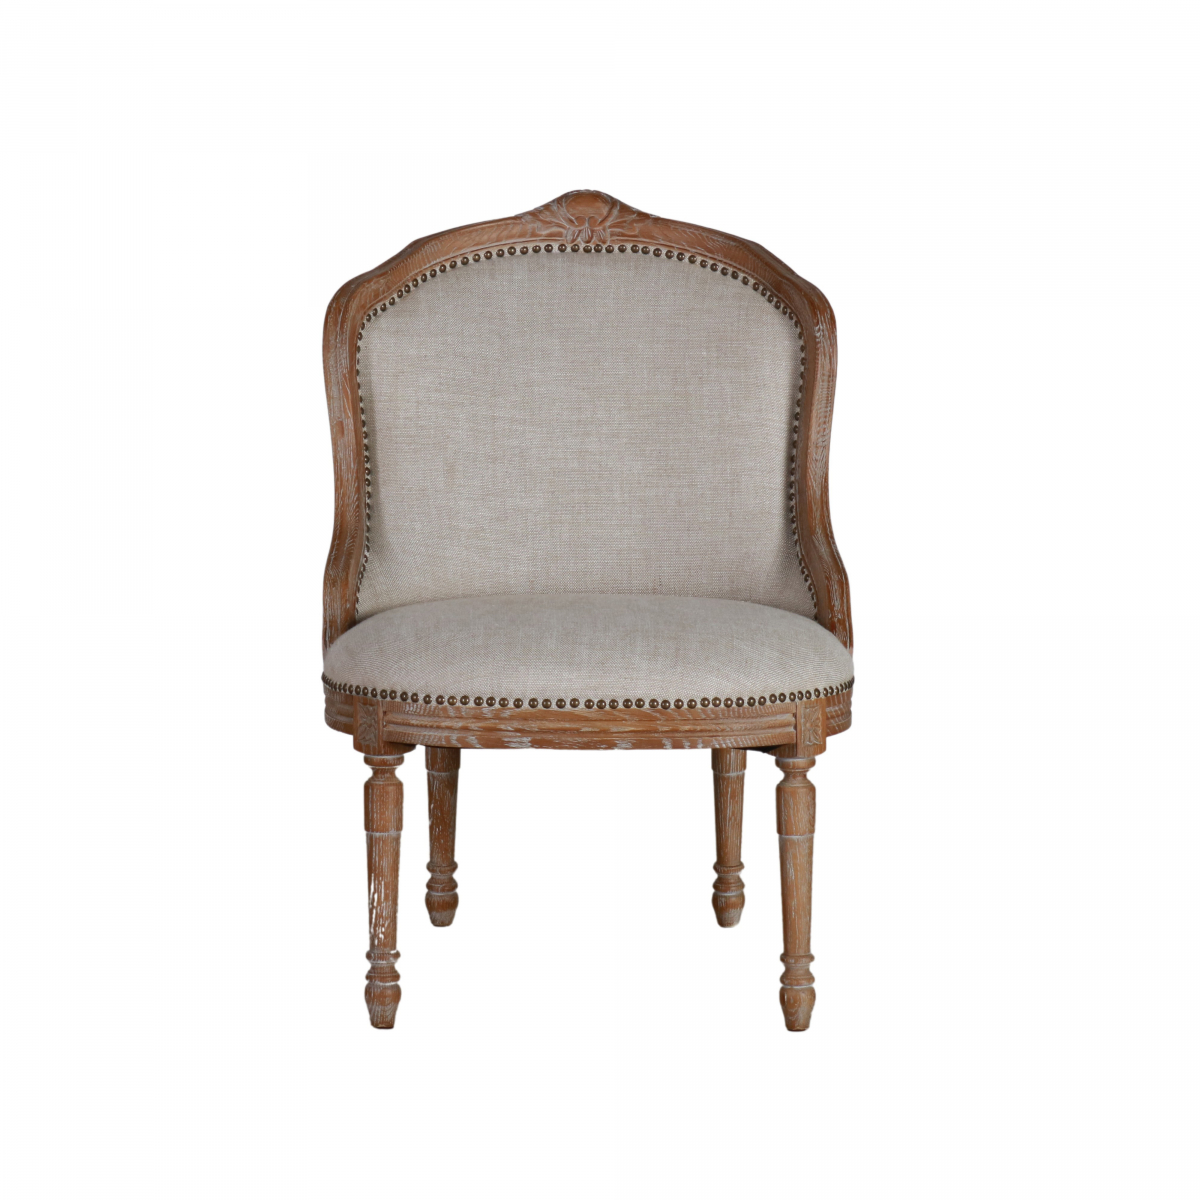 French chair with wooden frame and linen upholstery 